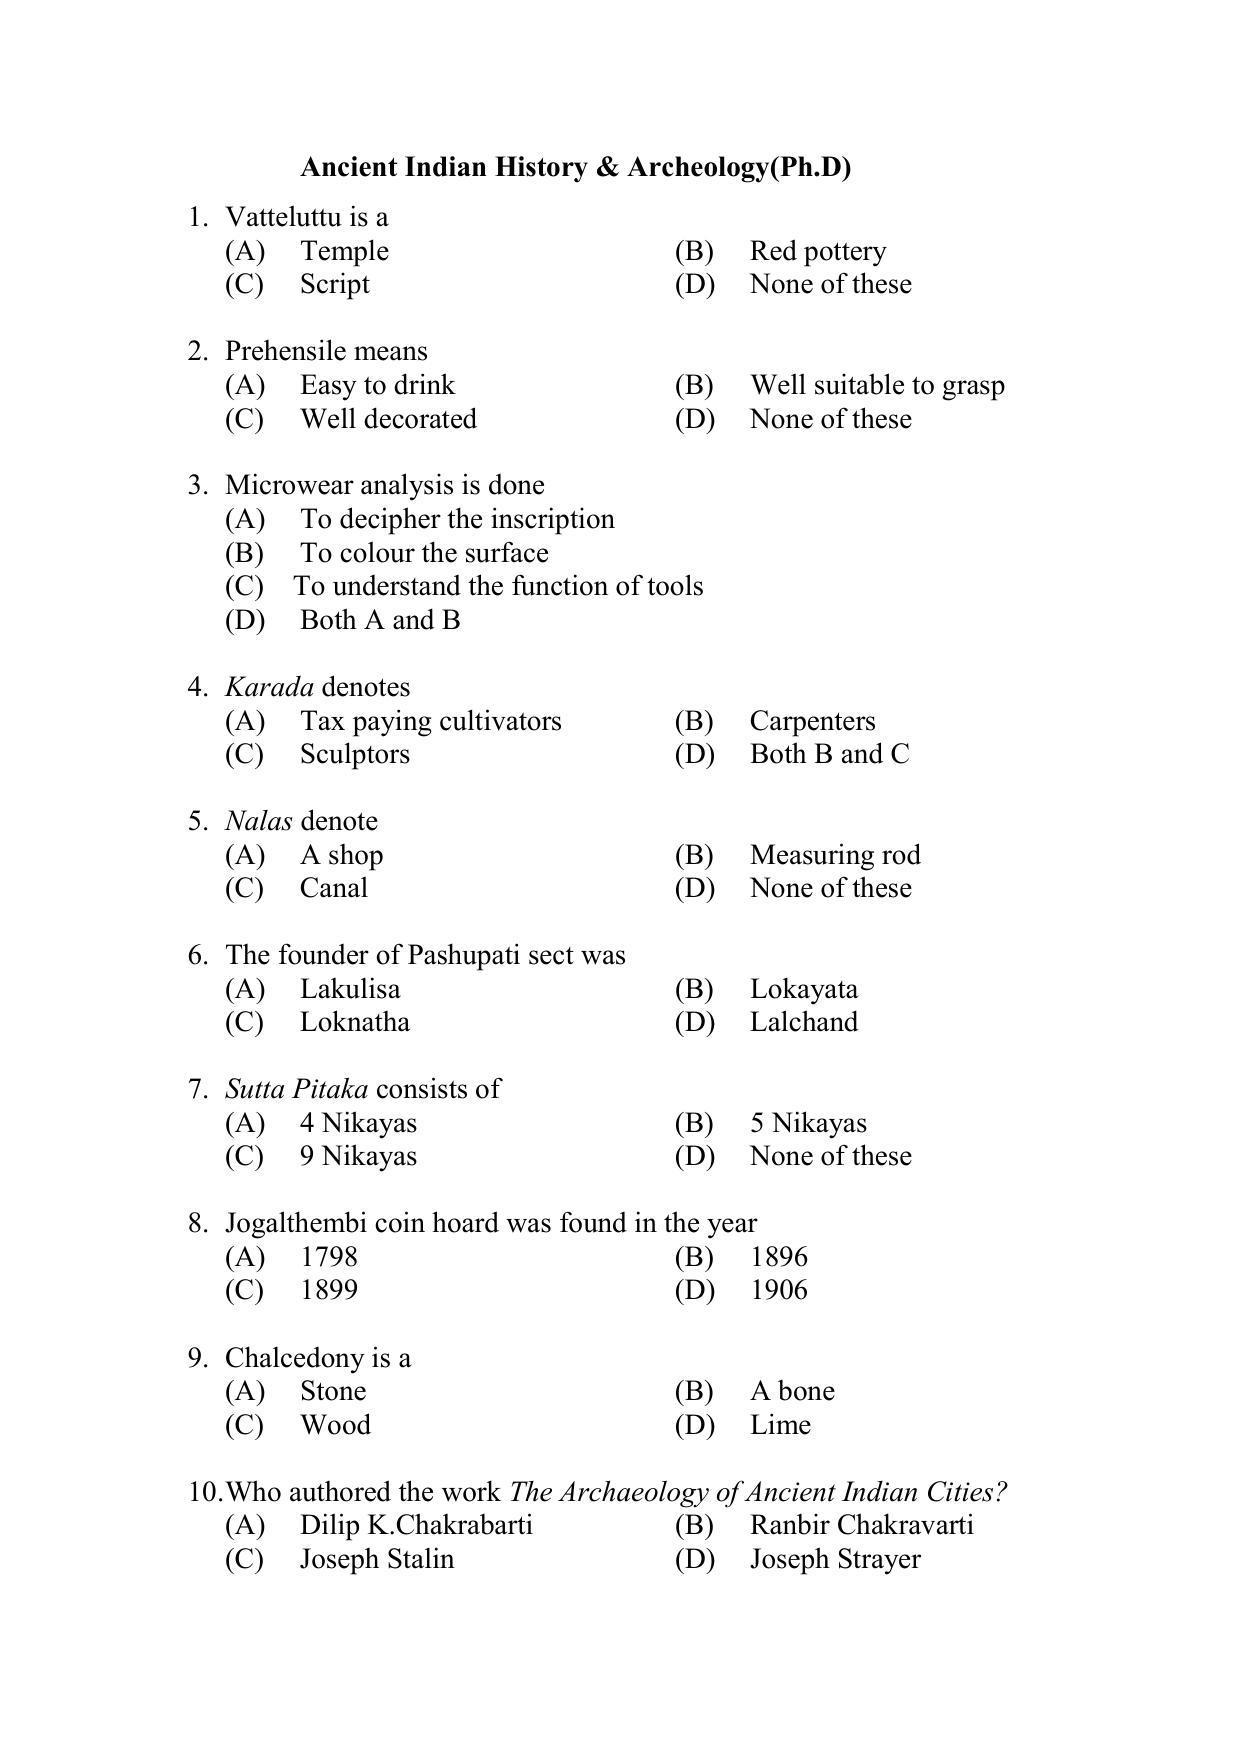 PU MPET Ancient Indian History & Archeology 2022 Question Papers - Page 1